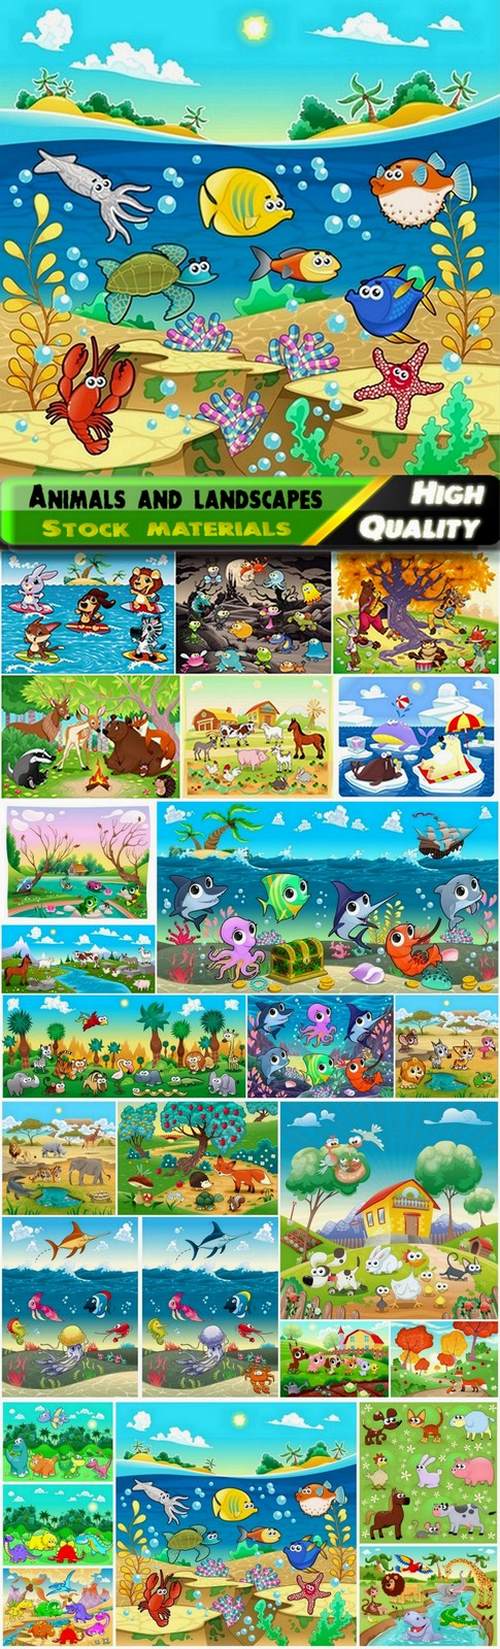 Domestic and wild animals in different landscapes - 25 Eps